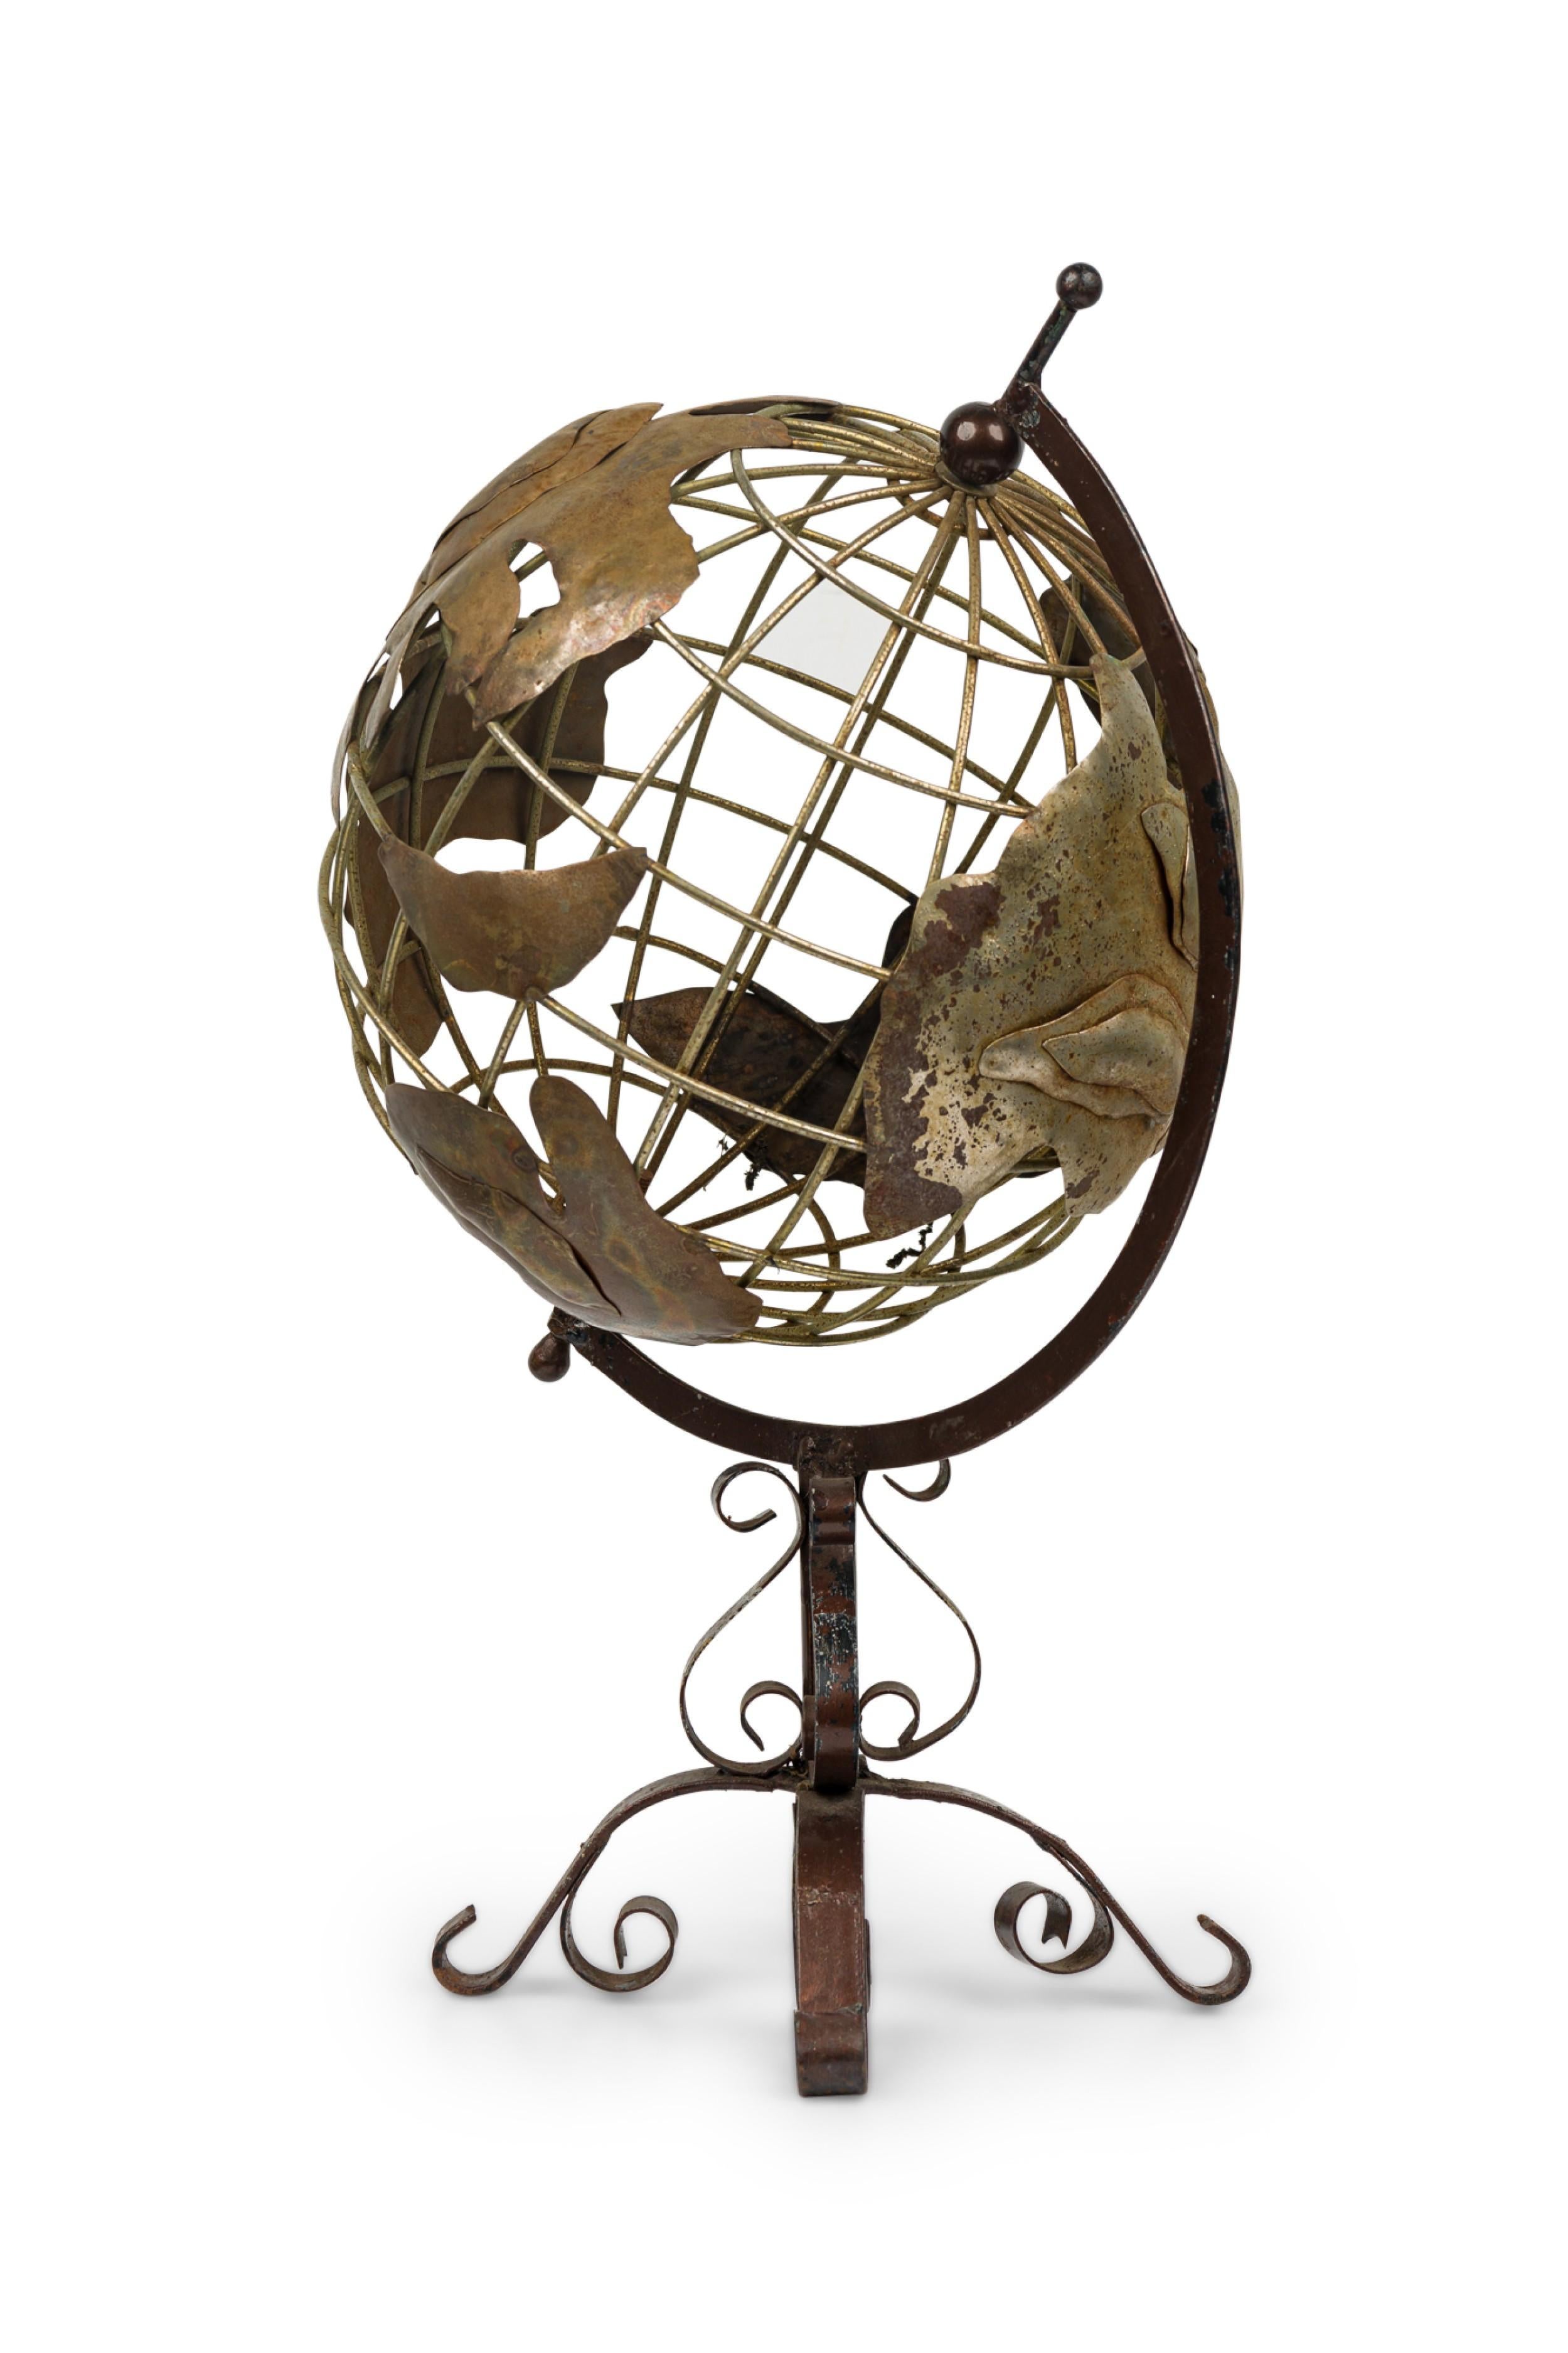 Contemporary American openwork metal globe rotates along its axis at a tilted angle, mounted on a scroll form metal stand.
 

 Wear to finish
